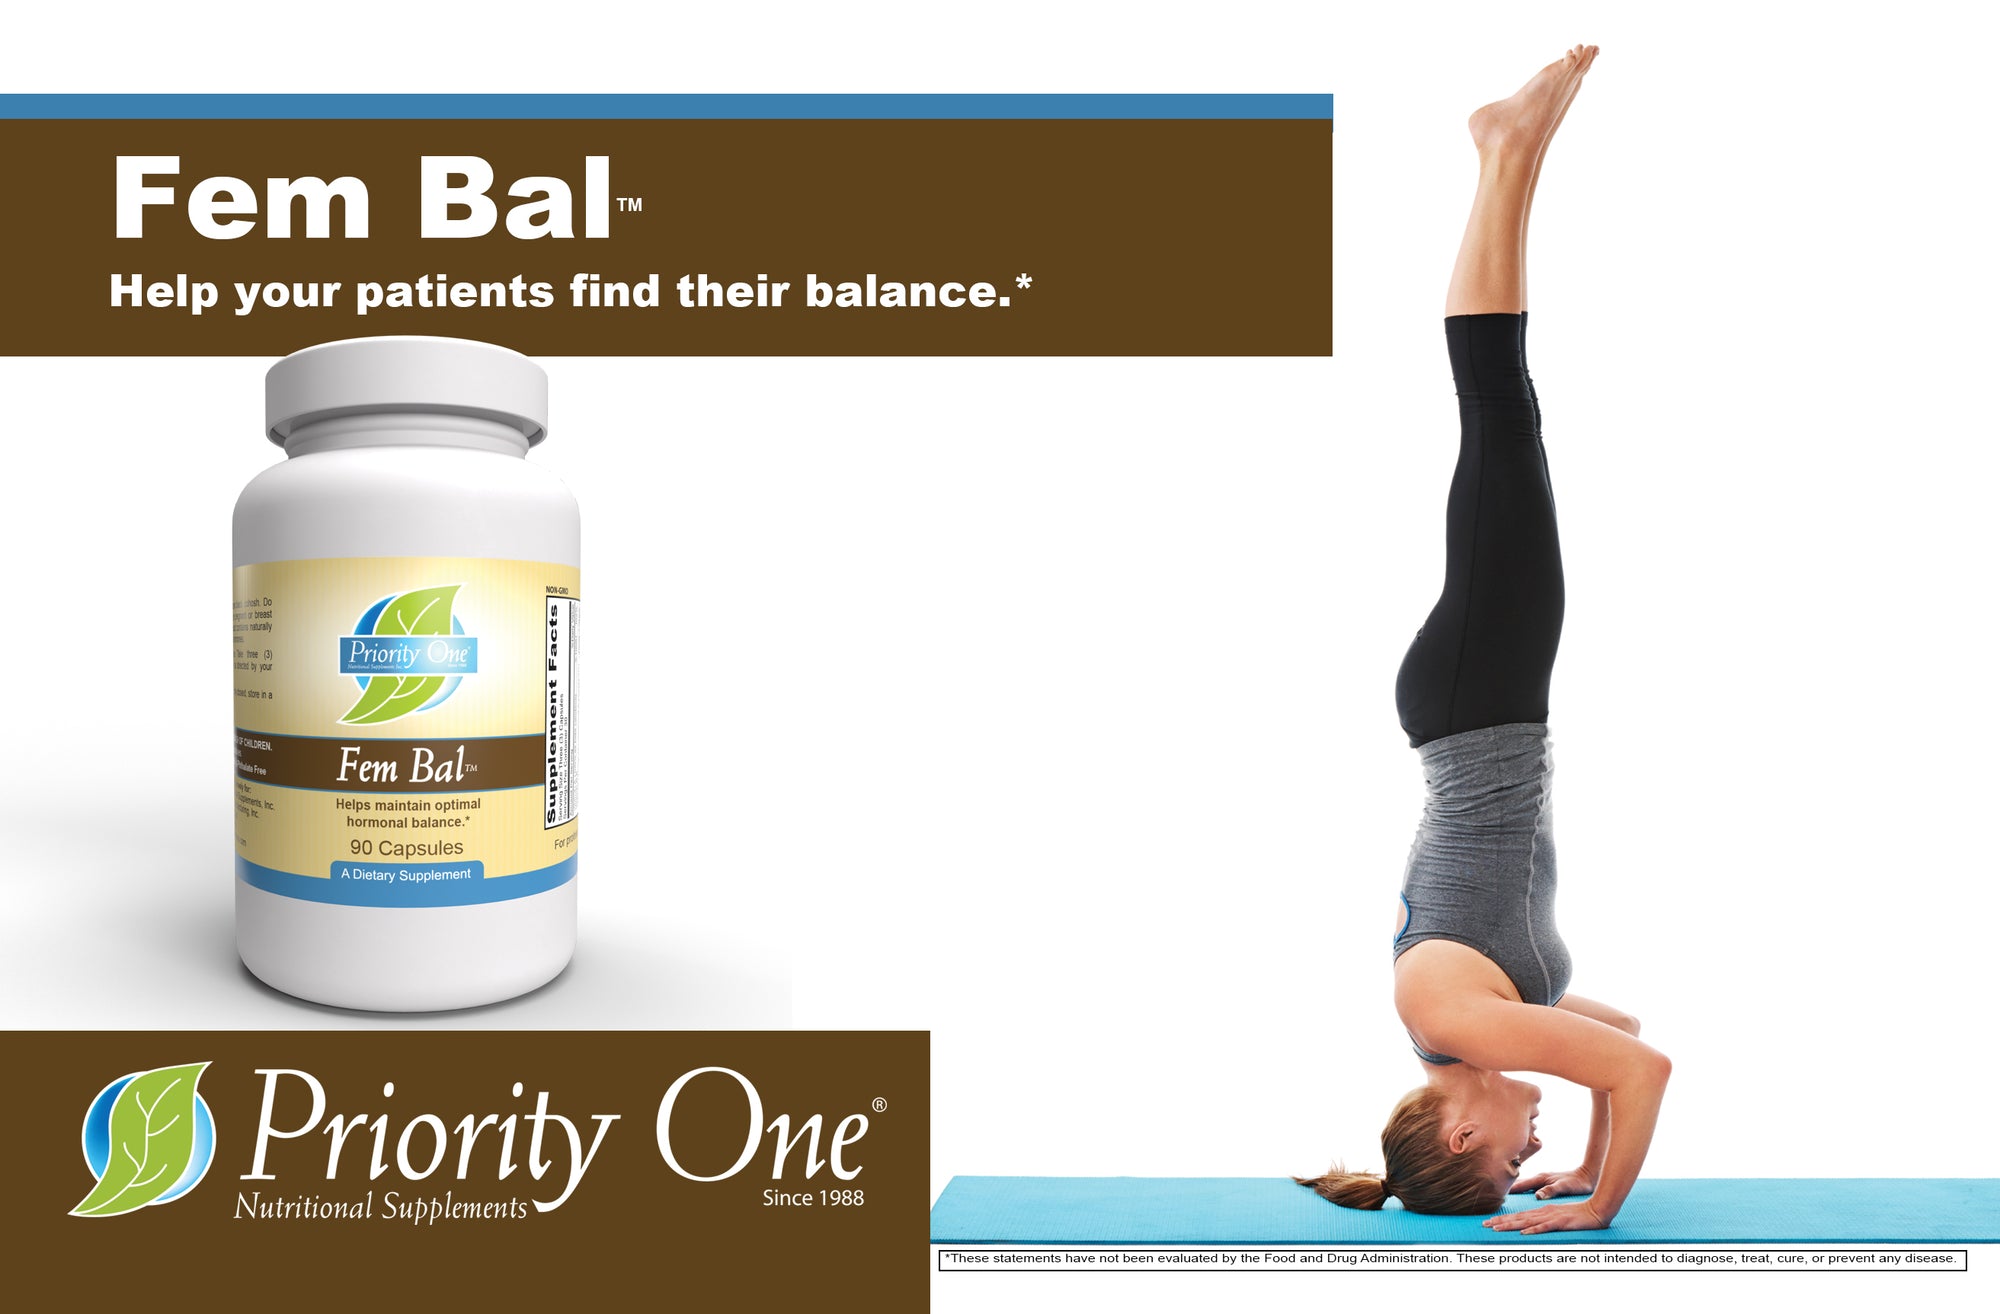 Fem-Bal (90 Capsules) - Female hormone-balance supplements from Grass fed beef.*